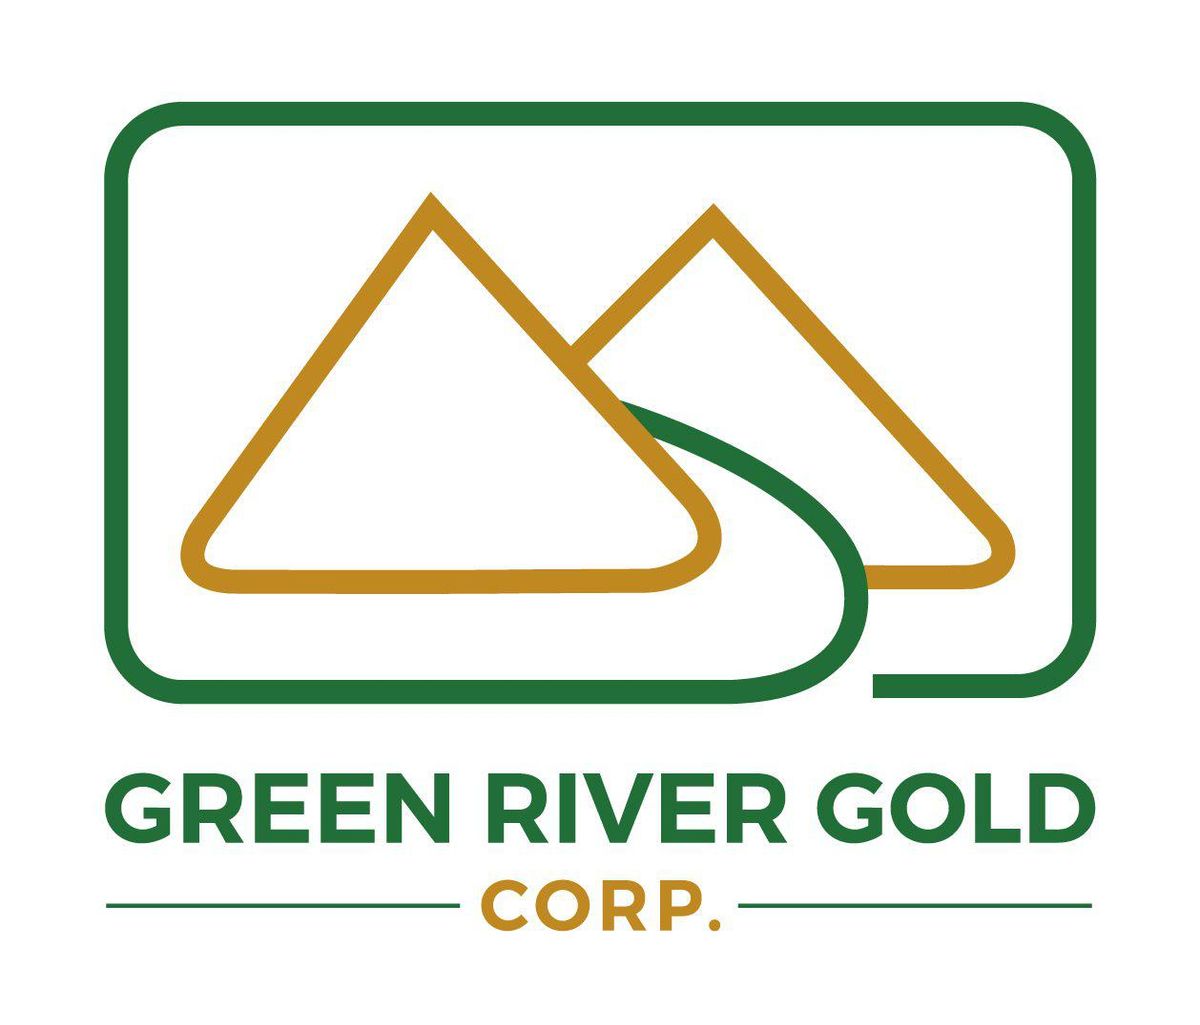 Green River Gold Corp. Announces Closing of Oversubscribed Private Placements of Flow-Through Shares and Units